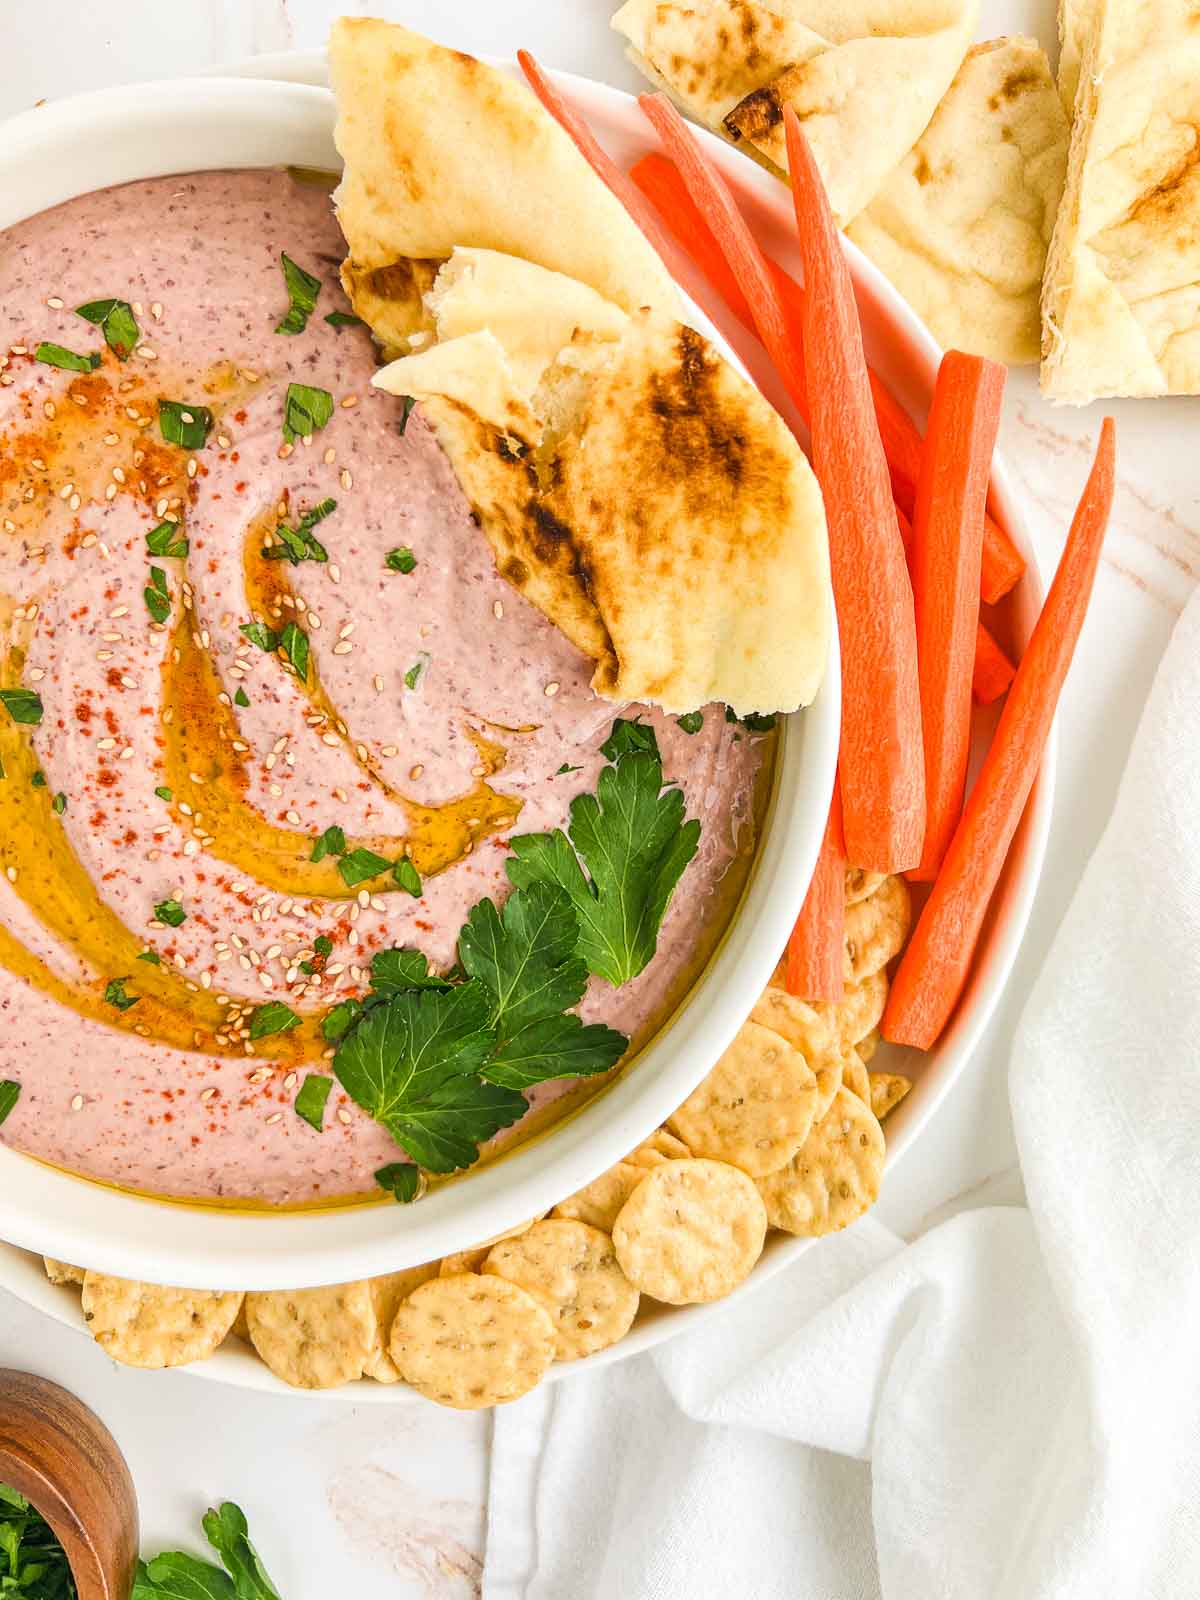 Bowl of kidney bean hummus garnished with oil, sesame seeds, and parsley, with carrots, crackers, and pita, with a white napkin.